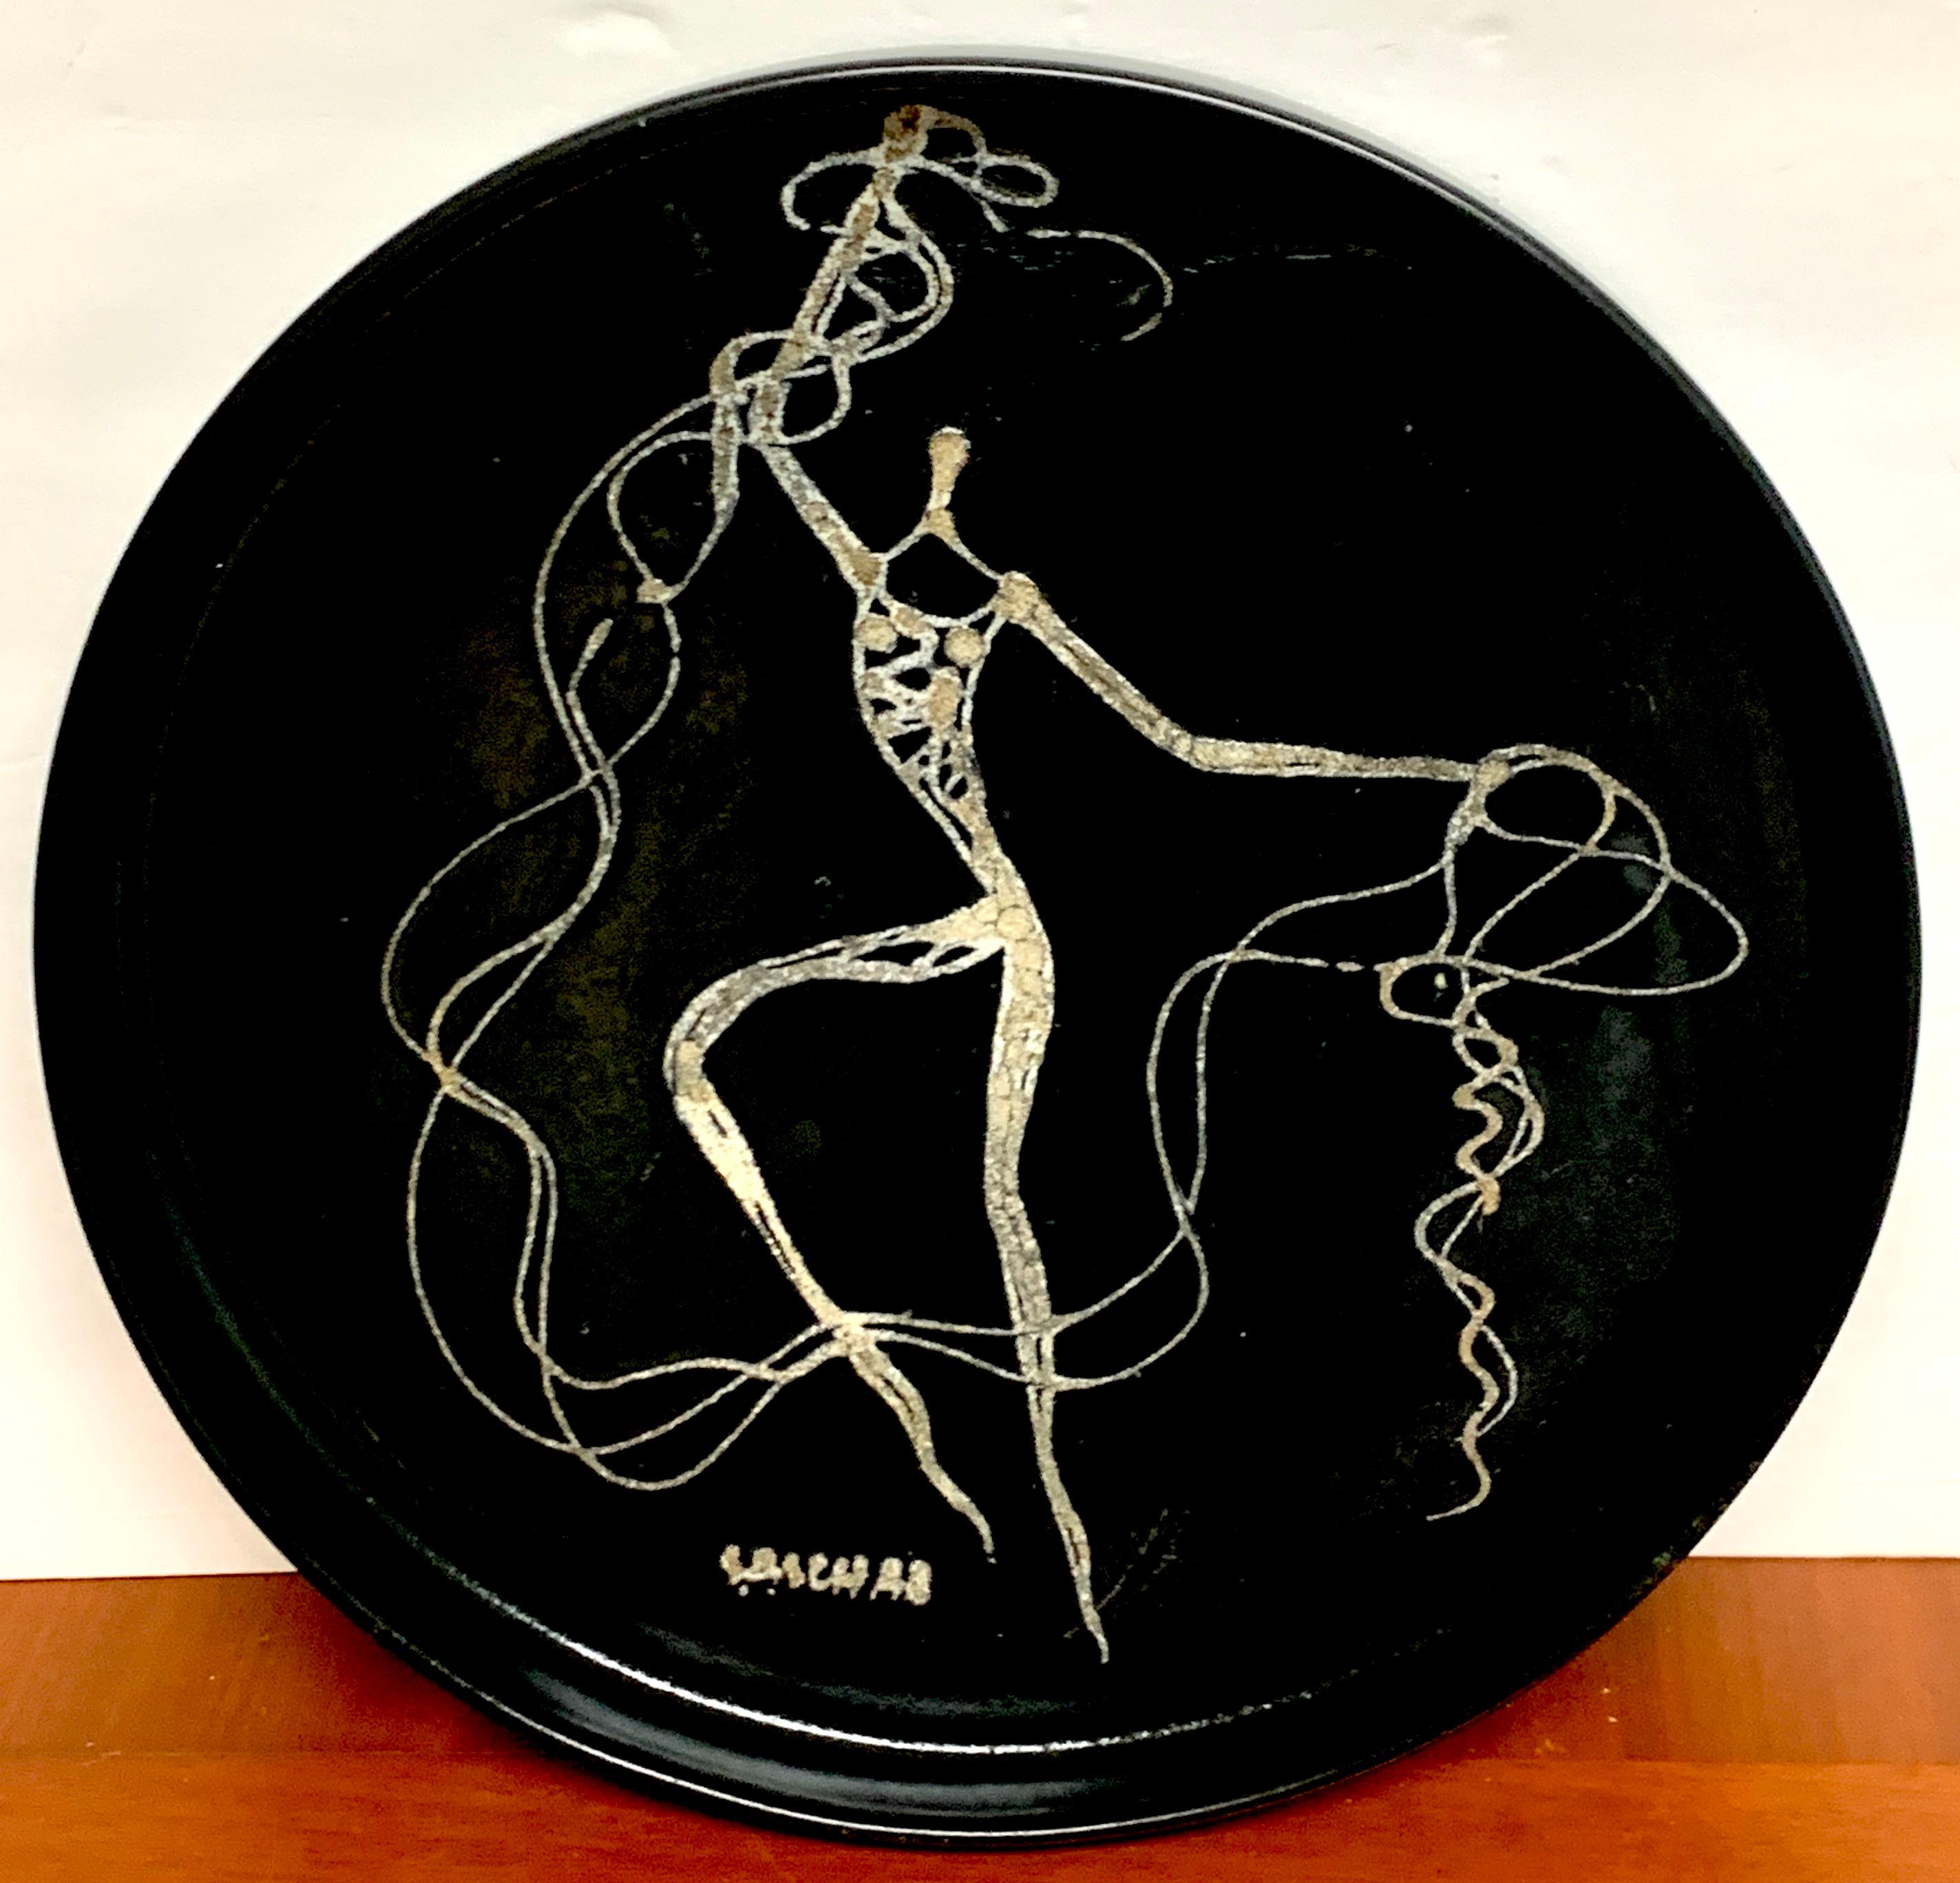 Midcentury abstract nude circular gallery tray by Sascha Brastoff, decorated in white slip on black background, signed on the front 'Sascha'.